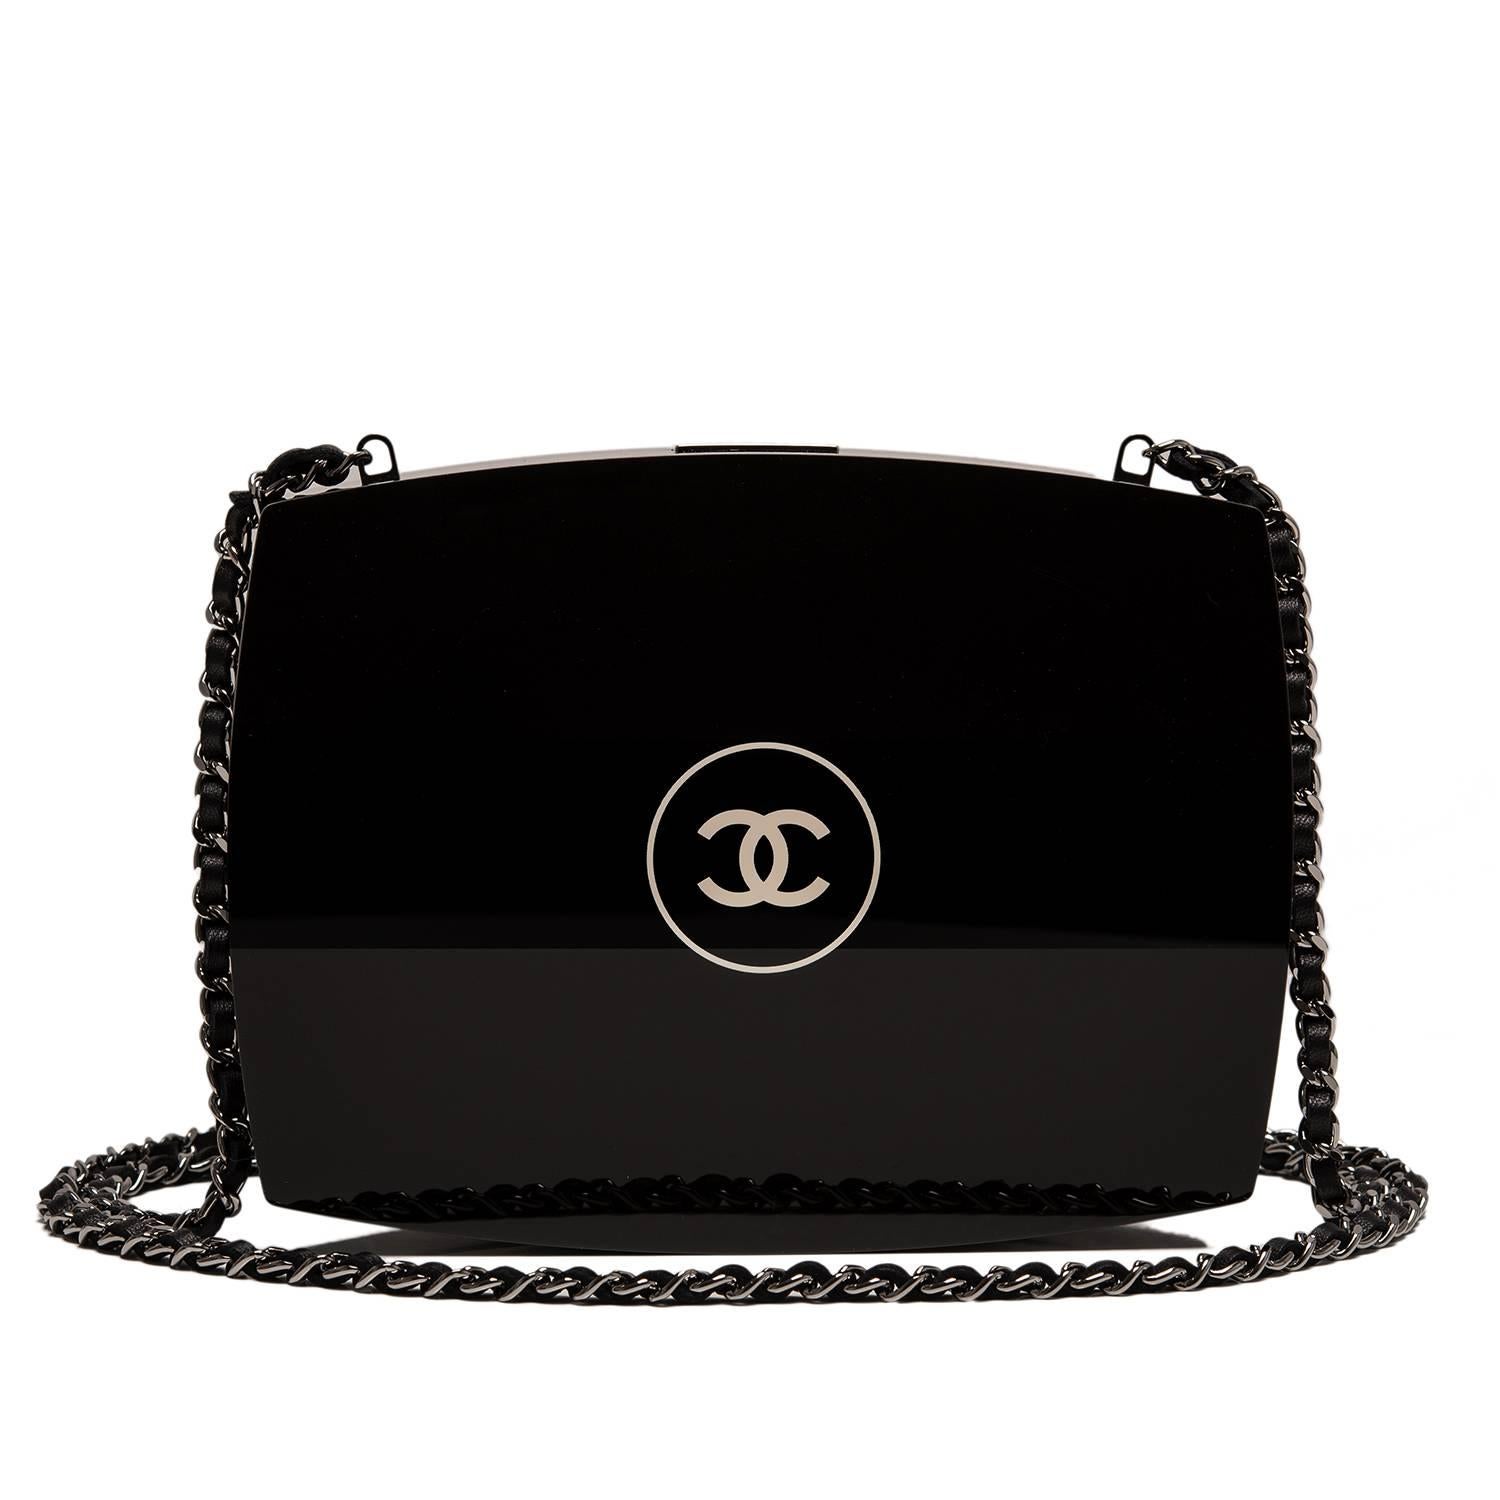 This Chanel Compact Powder Minaudière is made of black plexiglass with silver tone metal hardware.

It features Chanel's signature CC logo in circle on front, CHANEL engraved top snap closure, and interwoven silver tone chain link and black